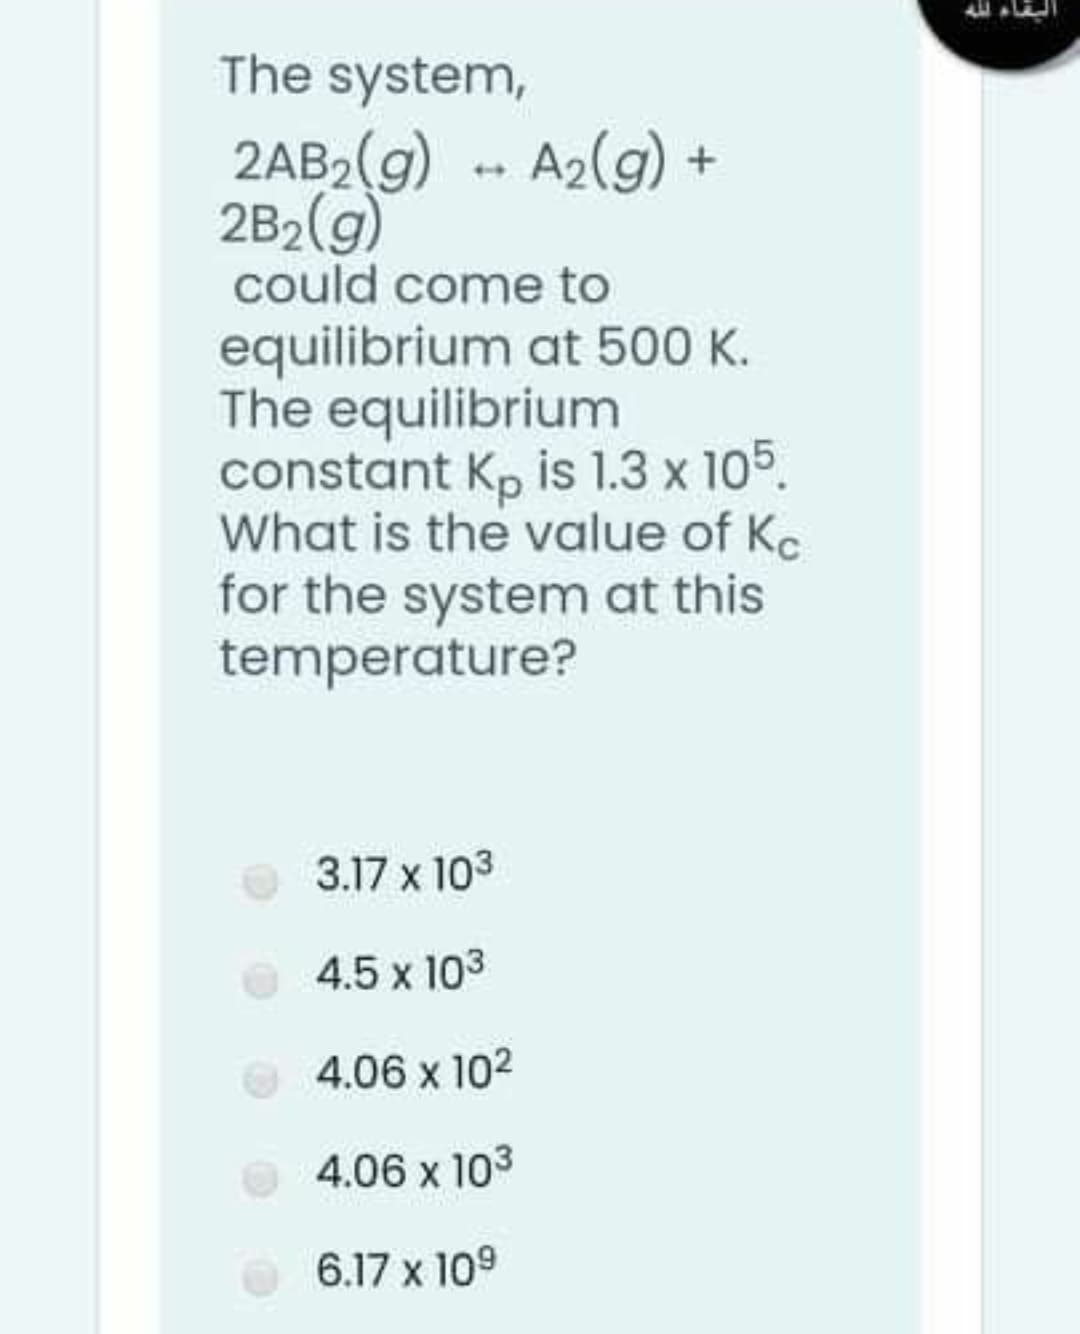 The system,
2AB2(g) - A2(g) +
2B2(g)
could come to
equilibrium at 500 K.
The equilibrium
constant Kp is 1.3 x 105.
What is the value of Ke
for the system at this
temperature?
3.17 x 103
4.5 x 103
4.06 x 102
4.06 x 103
6.17 x 109
